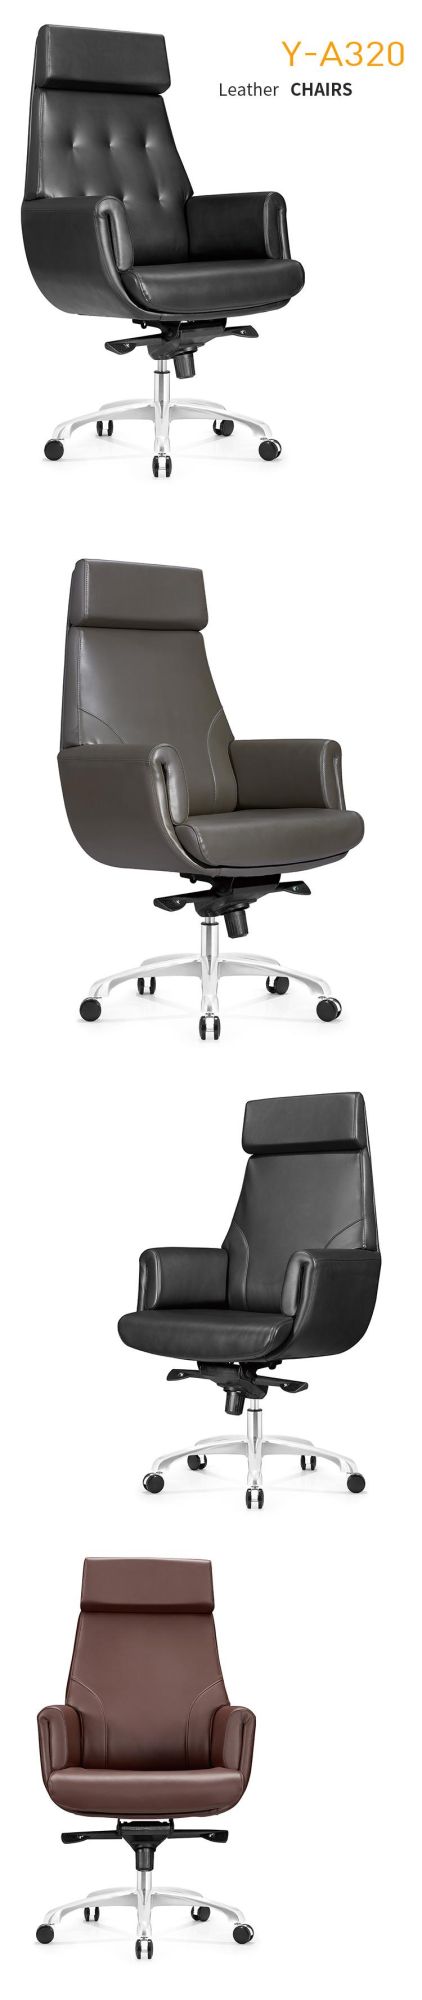 High Quality Leather Comfortable Recliner Swivel Executive Chair for Boss Office